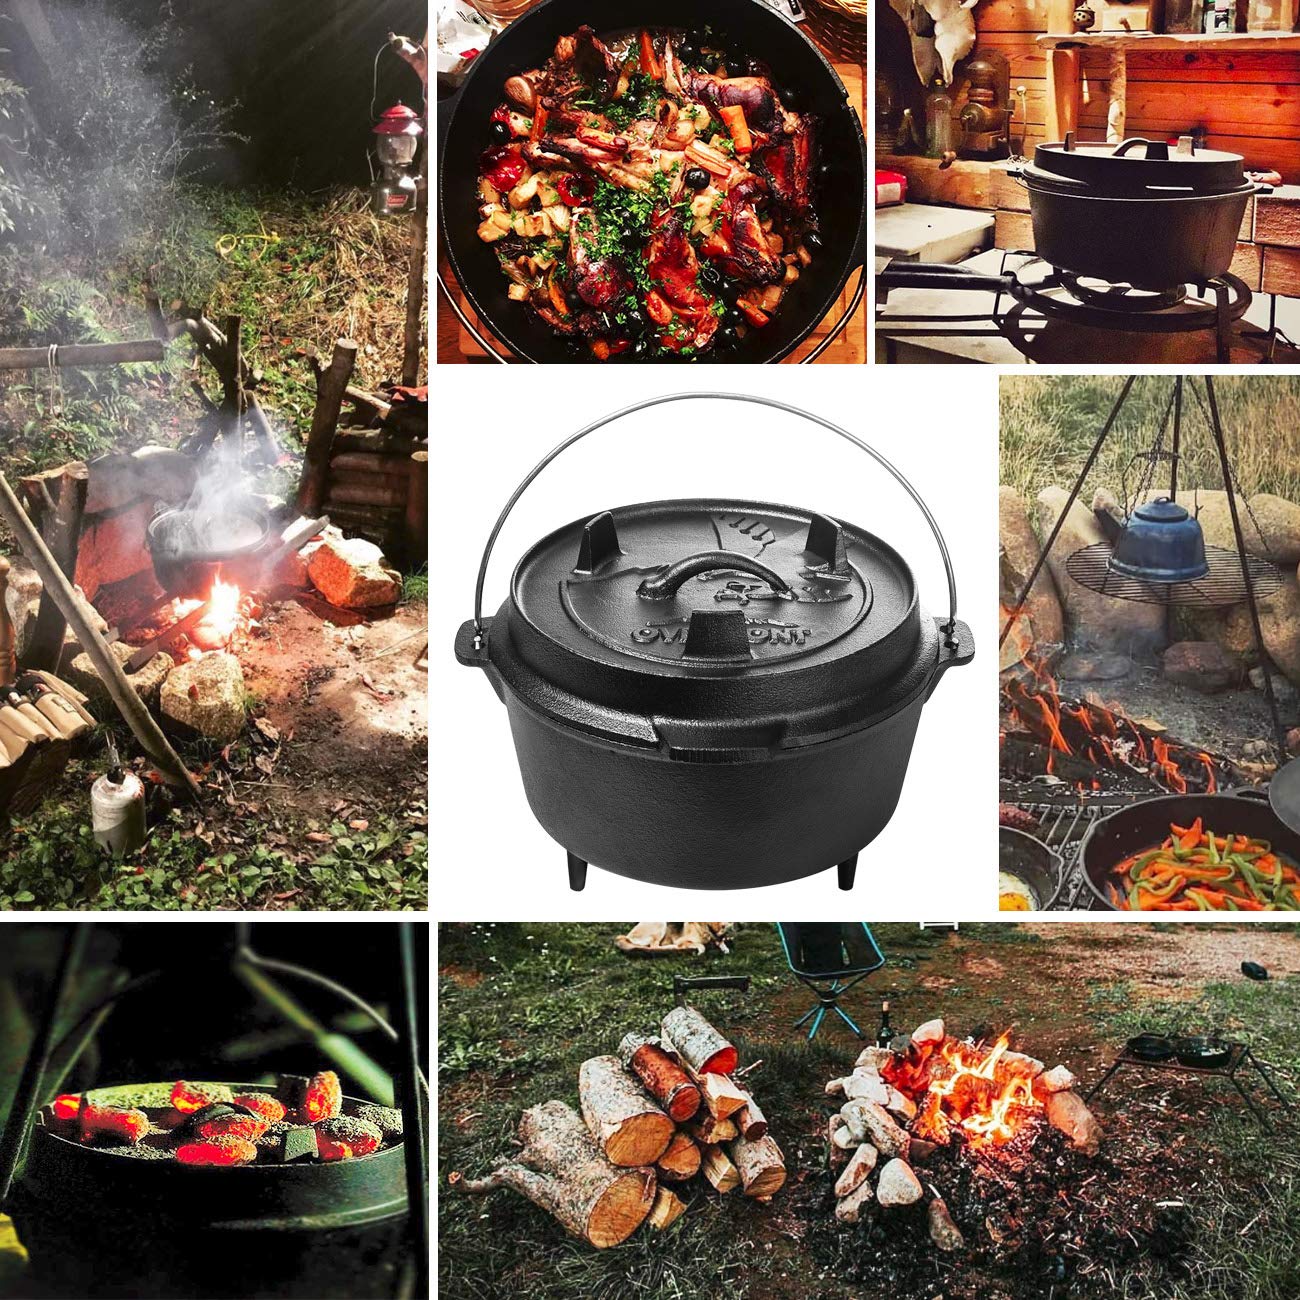 Overmont Camp Dutch Oven Pre Seasoned Cast Iron Lid Also a Skillet Casserole Pot with Lid Lifter for Camping Cooking BBQ Baking 6QT(Pot+Lid)